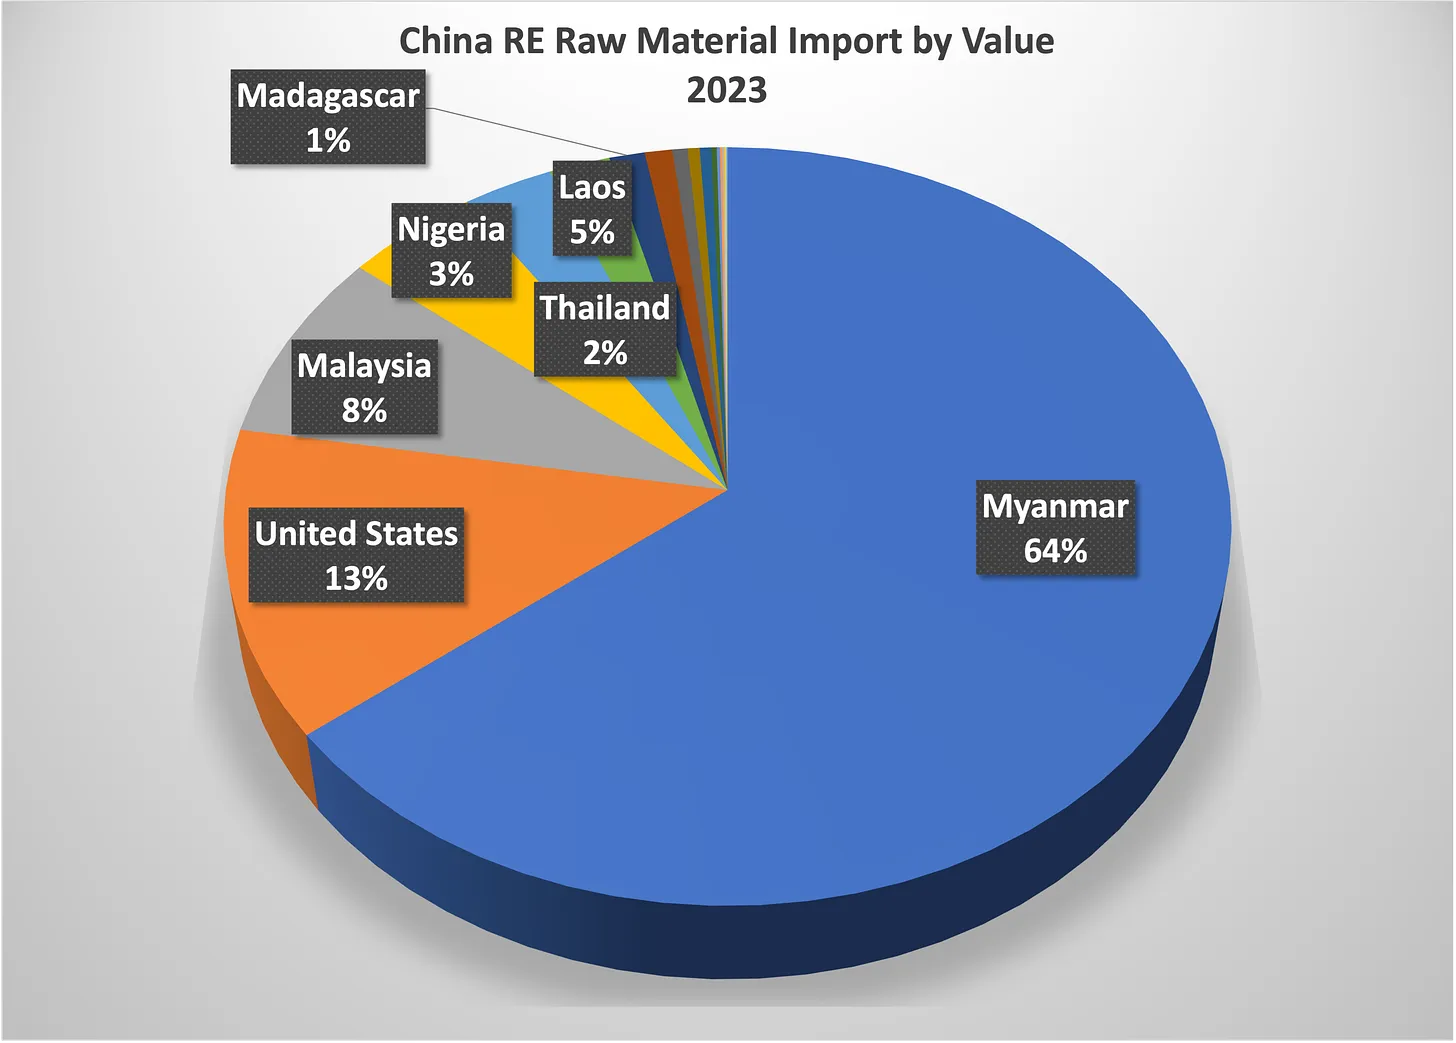 2023 RE Imports by Value